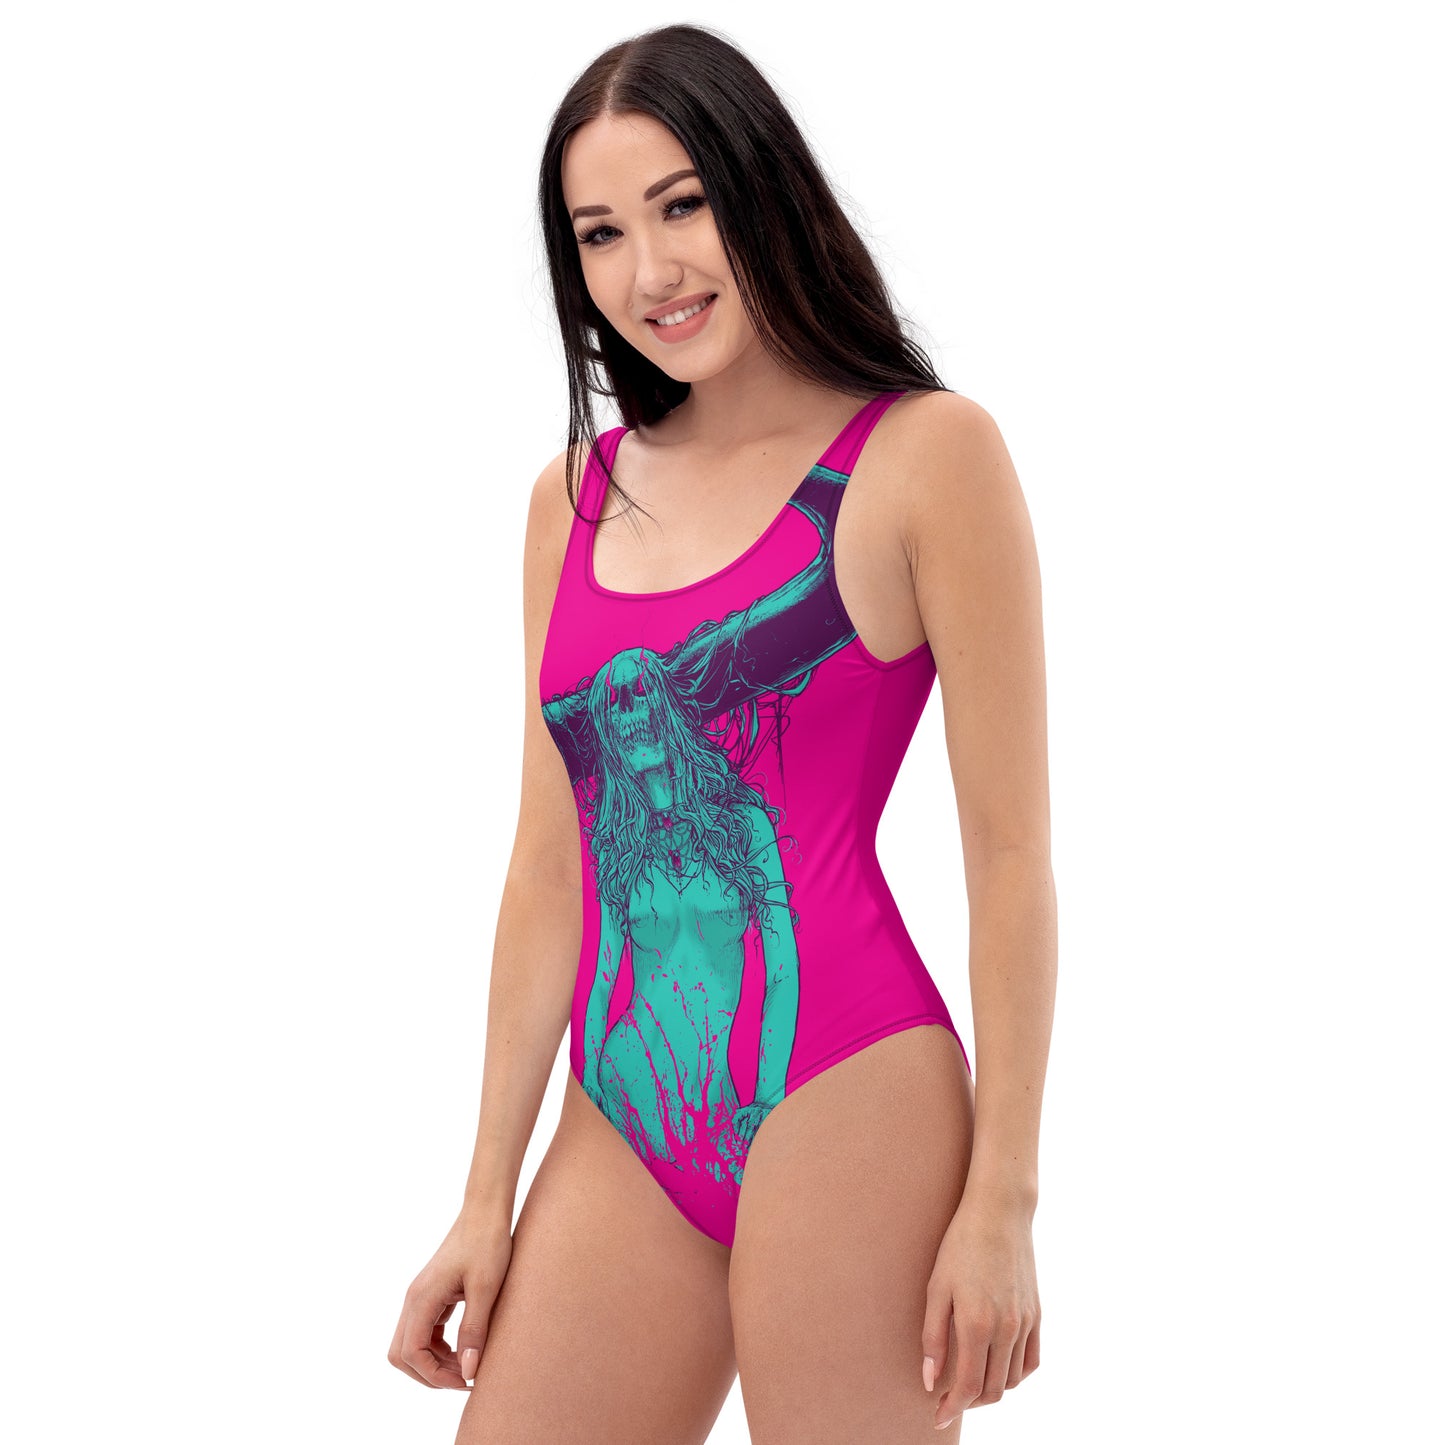 Melvins One-Piece Swimsuit